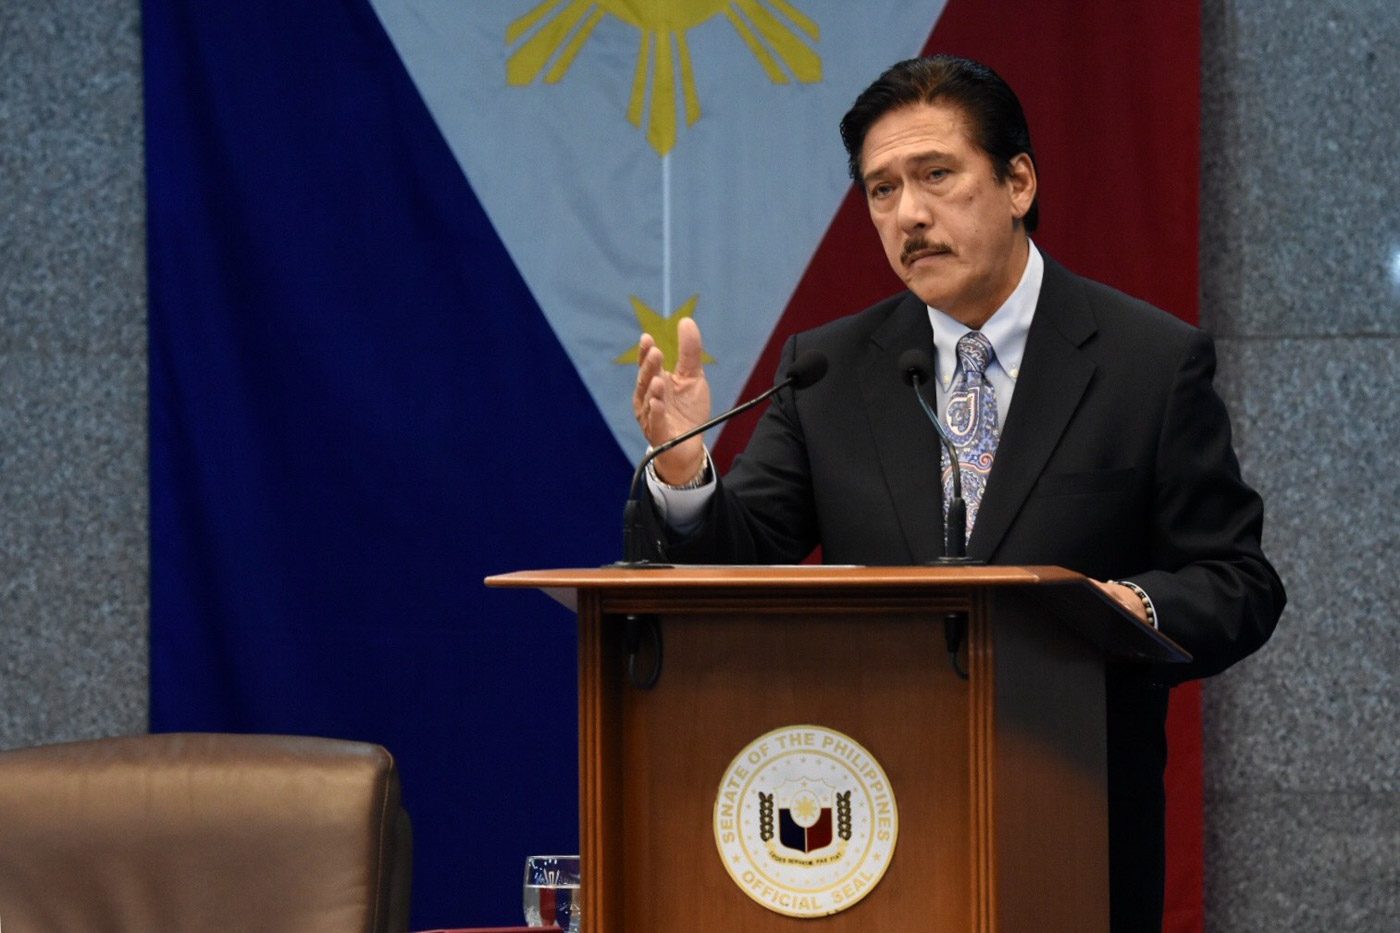 Senate under Sotto to have ‘cordial’ working relationship with Duterte